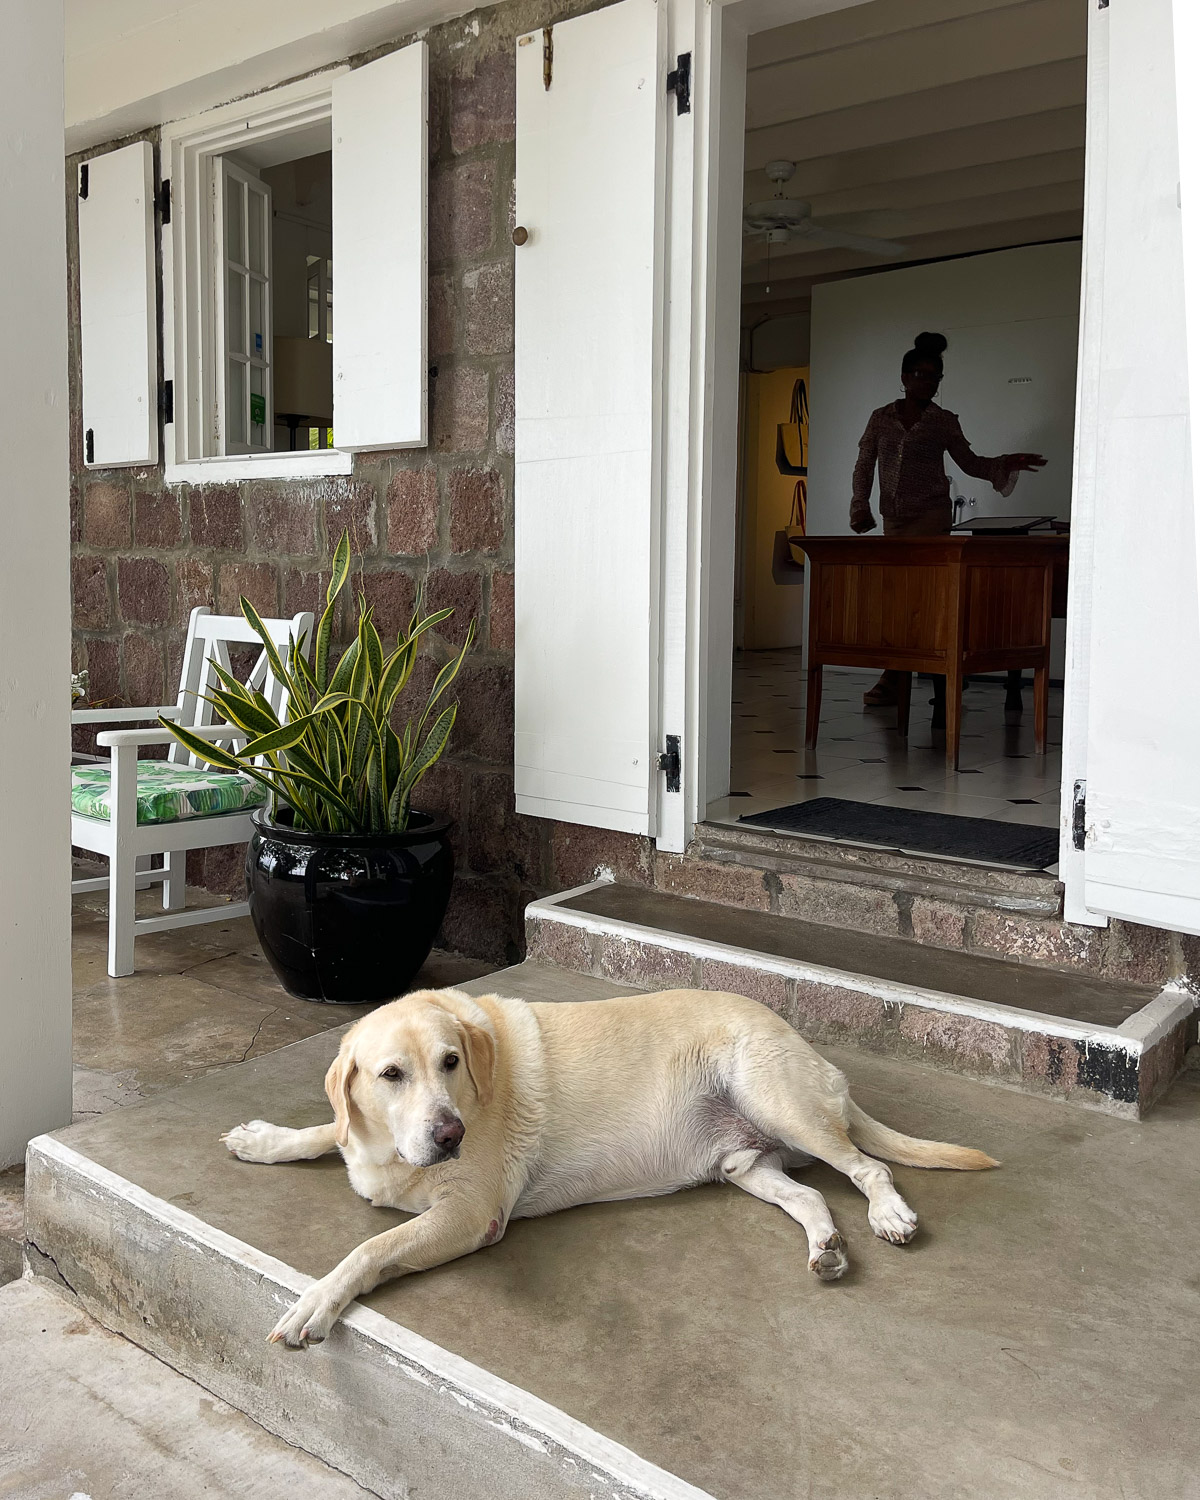 Cosmo the labrador at Montpelier Plantation and beach in Nevis Photo Heatheronhertravels.com